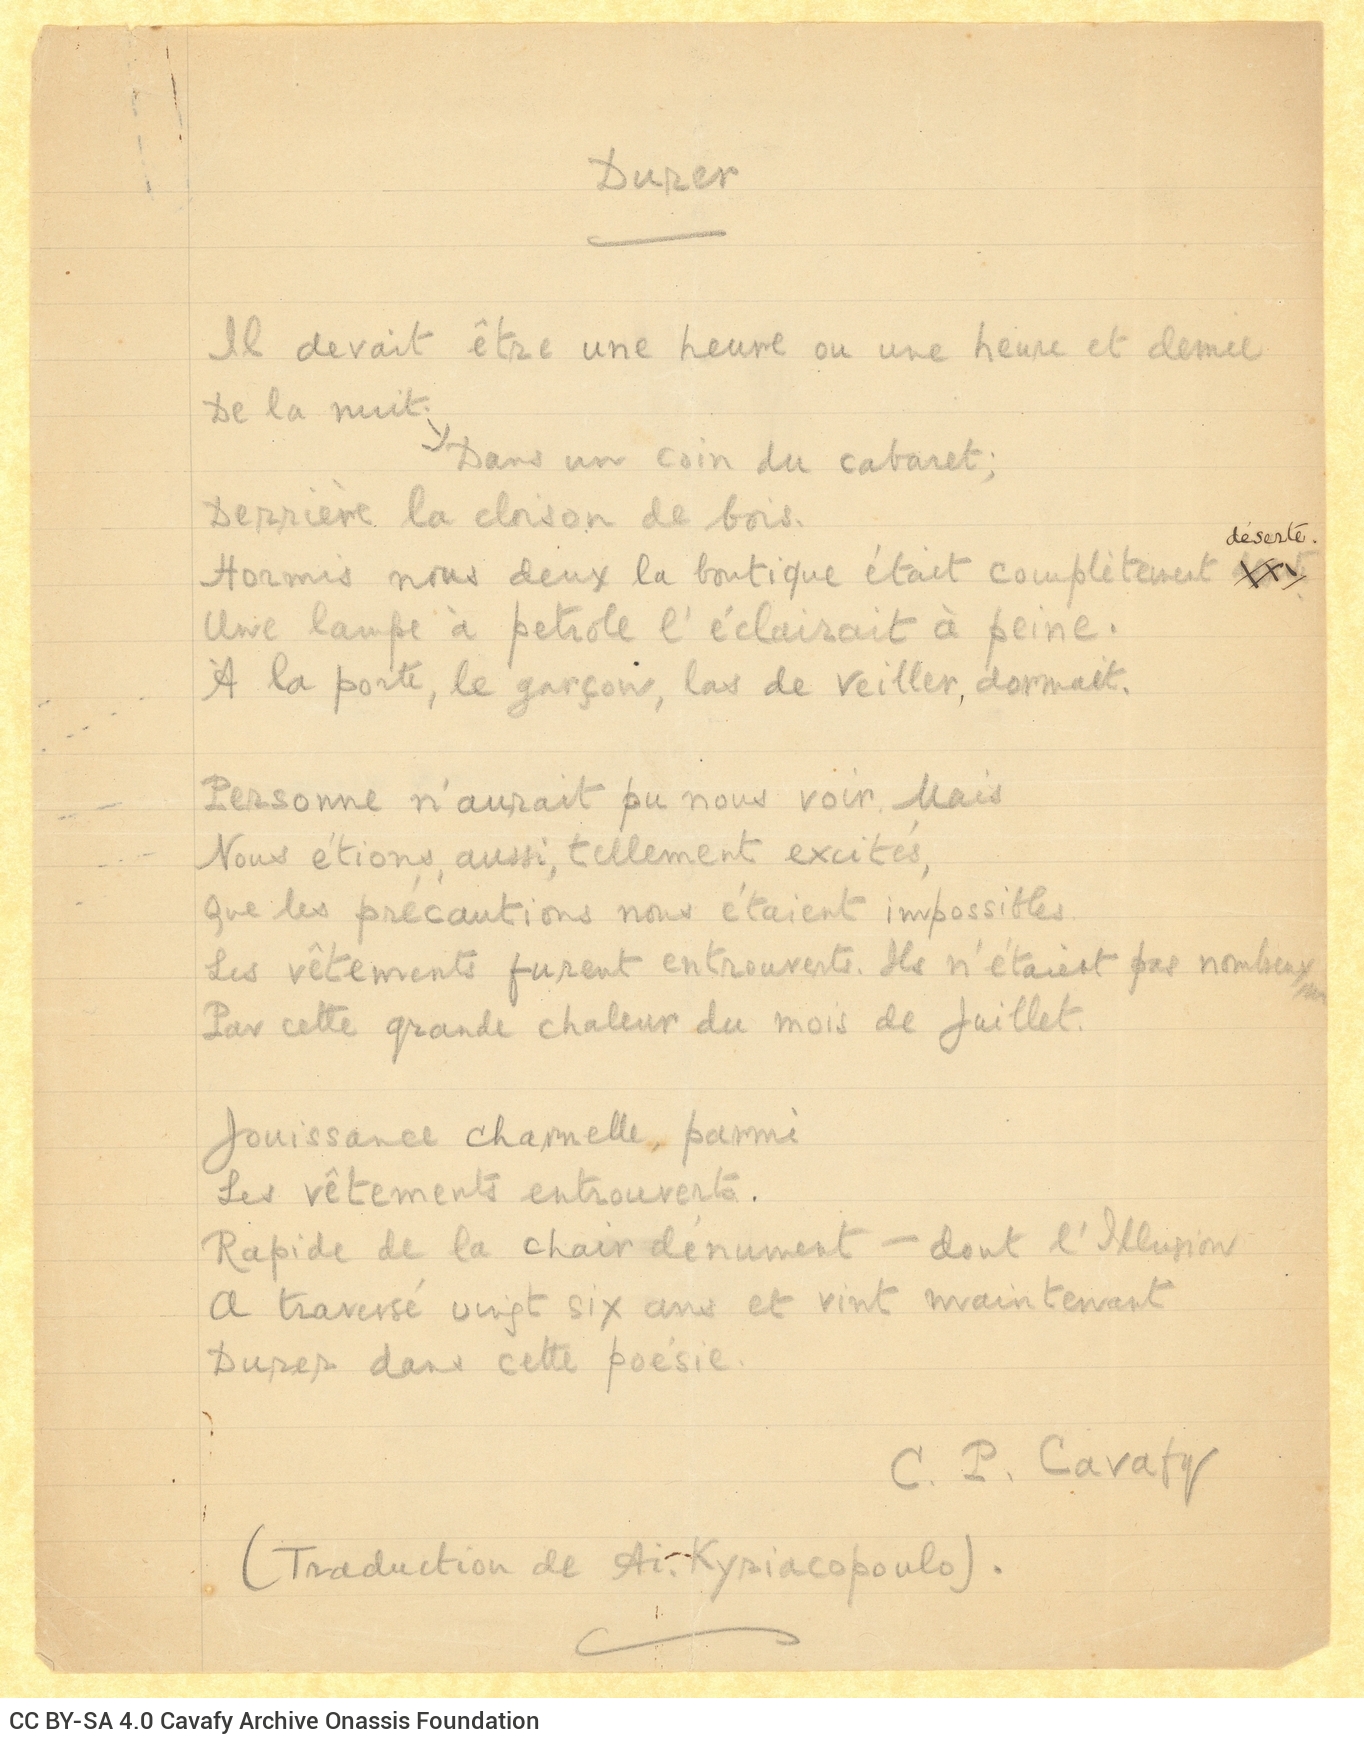 Manuscript of a text written in French. Translation of a poem by Cavafy ("To Stay"), with an emendation in one of the vers